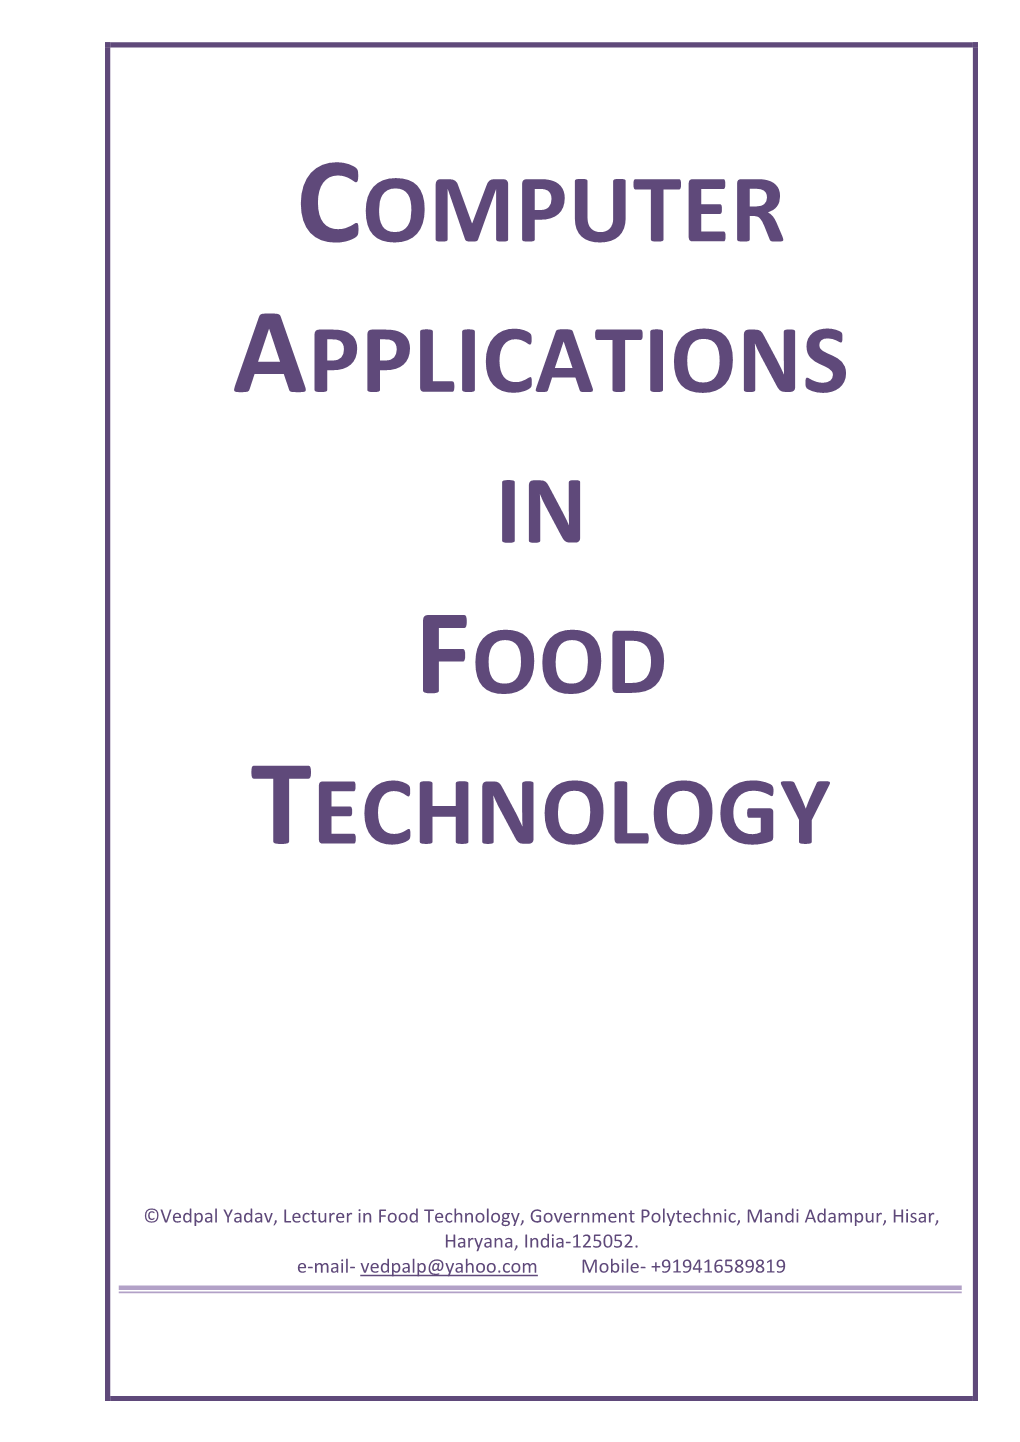 Computer Applications in Food Technology